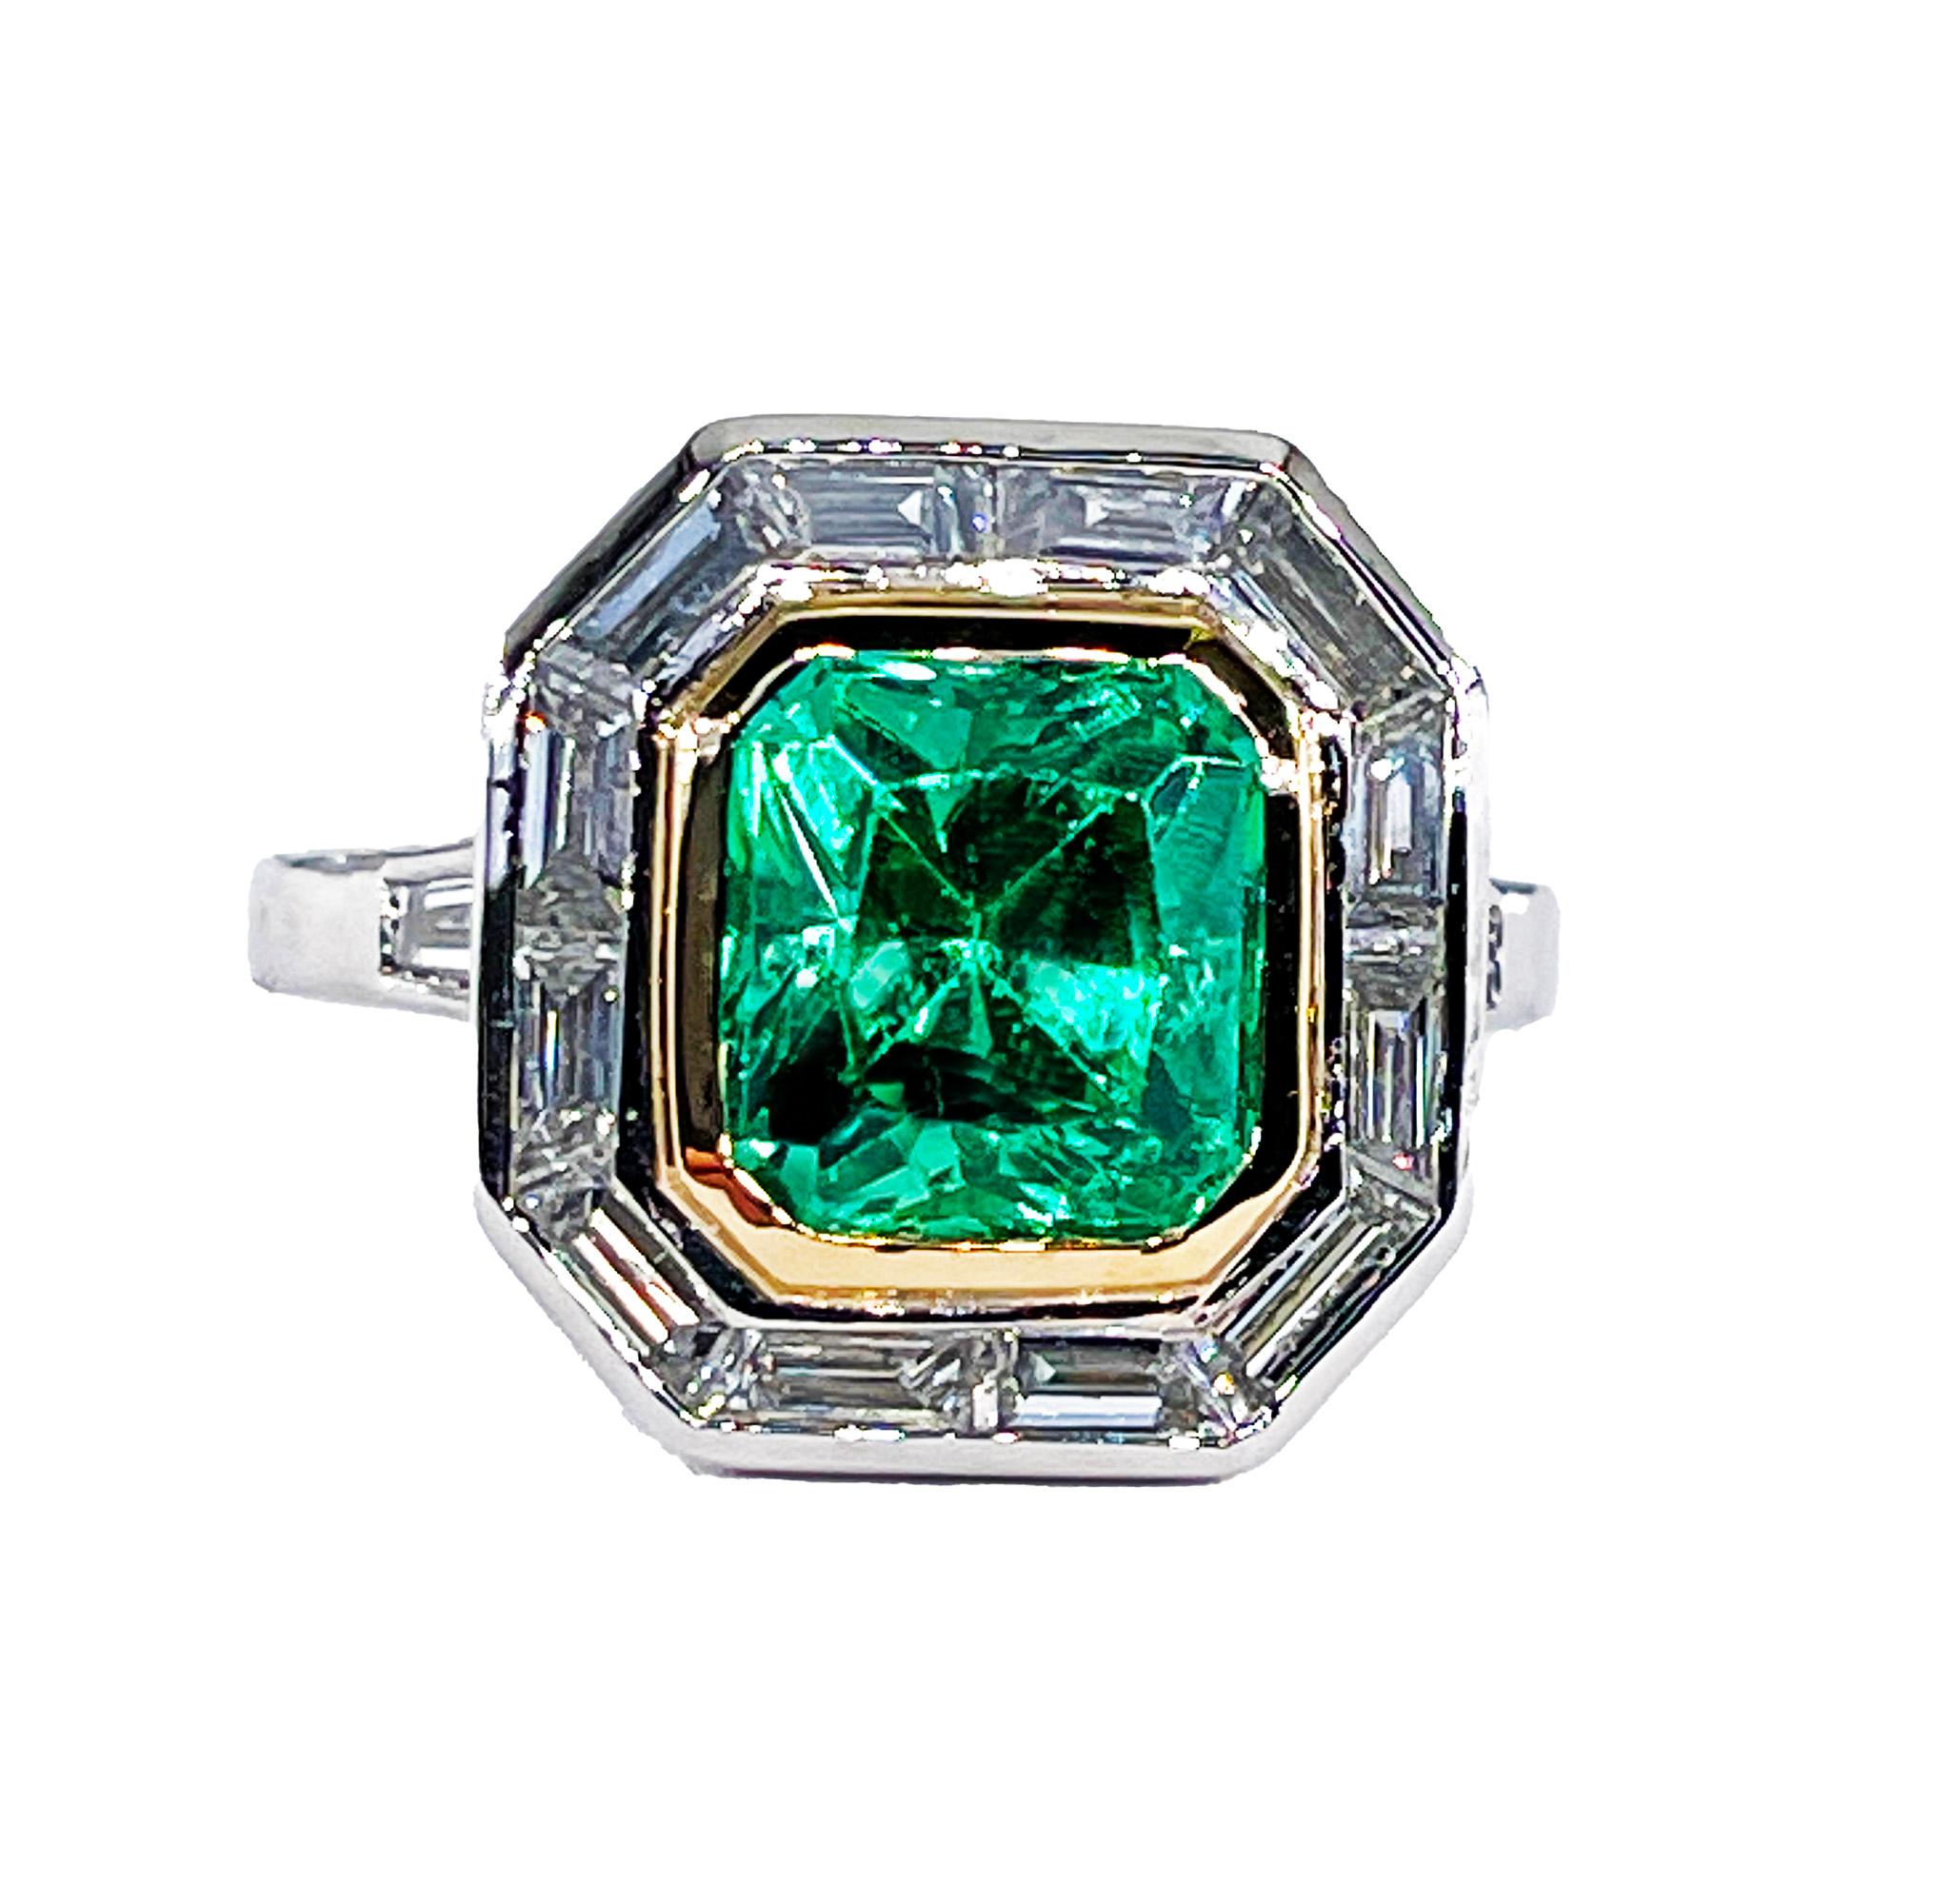  AGL Insignificant VVS 4.66ctw Natural Green Emerald Diamond Platinum 18k Ring In Excellent Condition For Sale In New York, NY